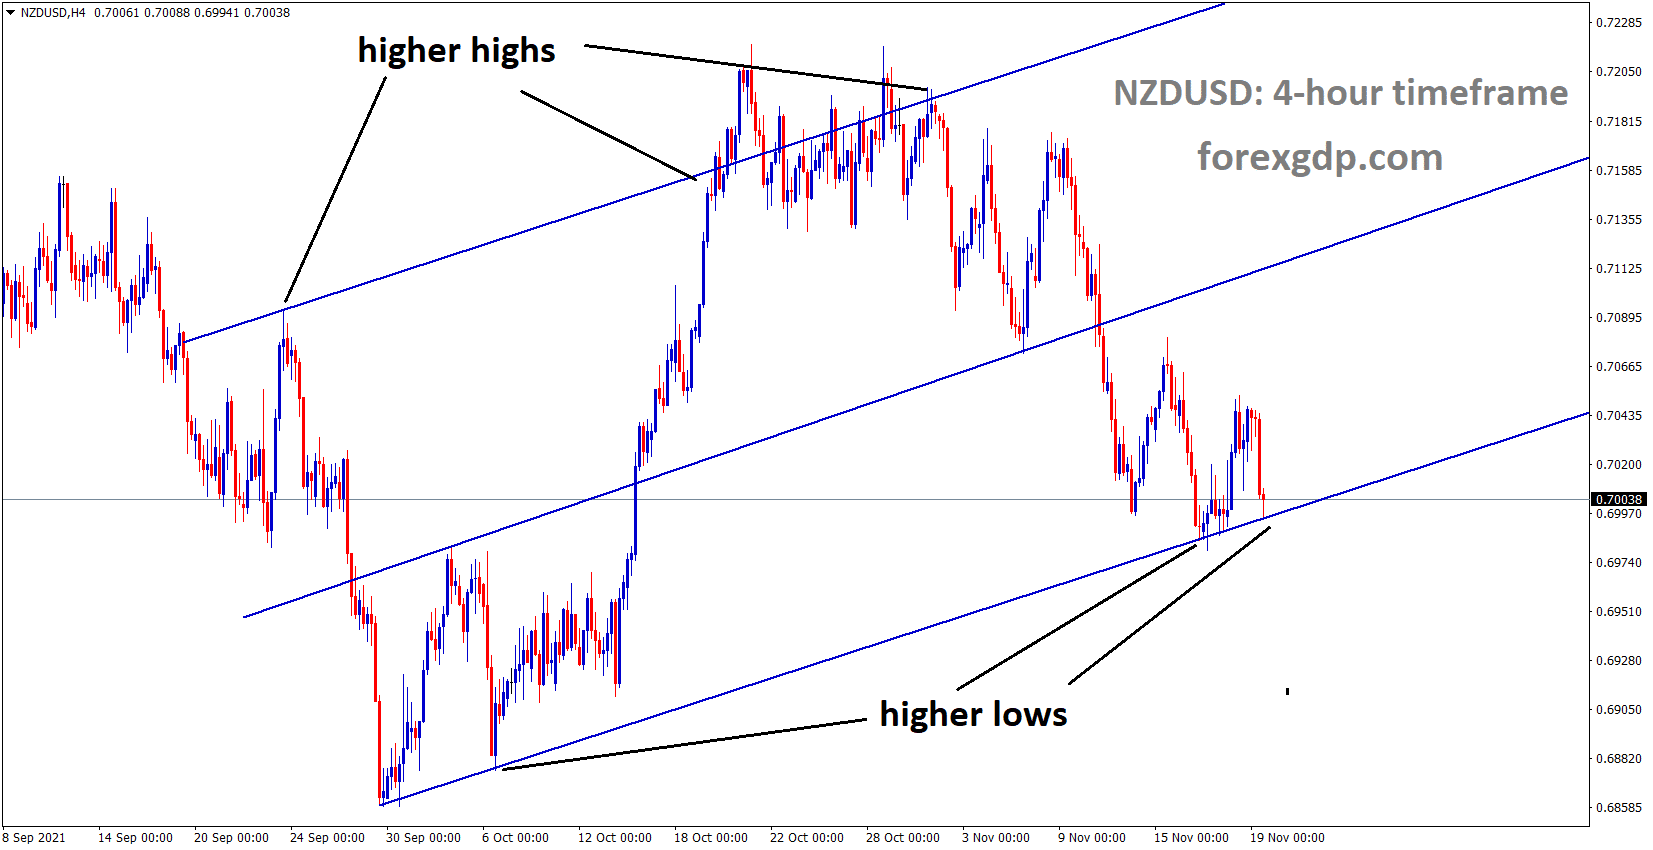 NZDUSD is moving in an Ascending channel and the market reached the Higher low area of the channel